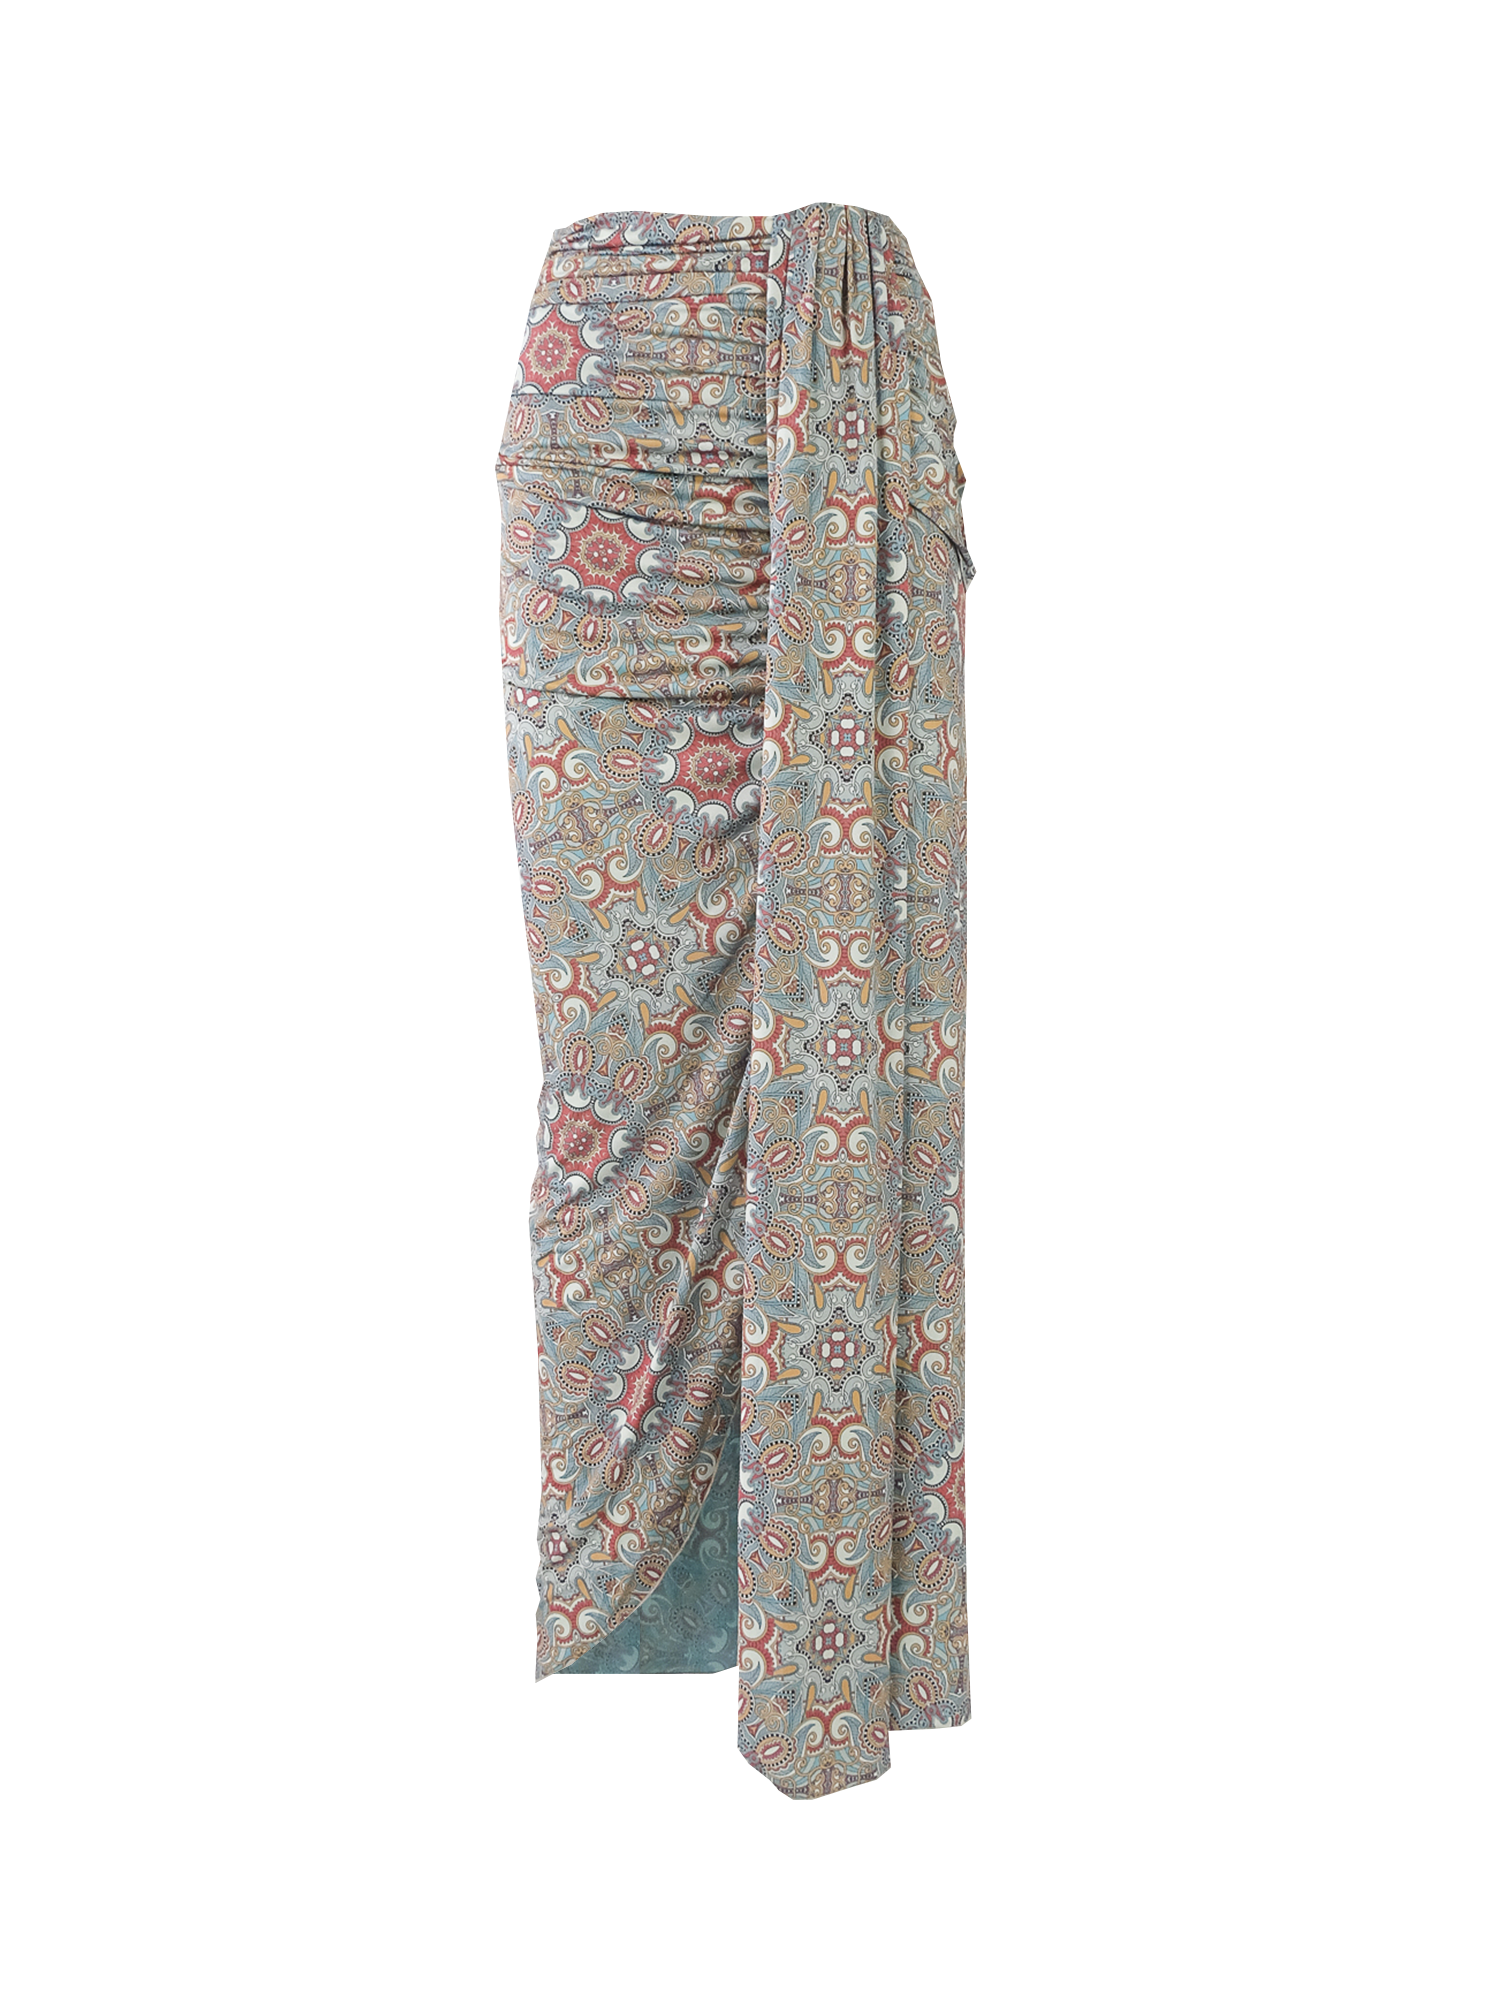 AMANDA - long skirt in Vietri patterned lycra with a slit.